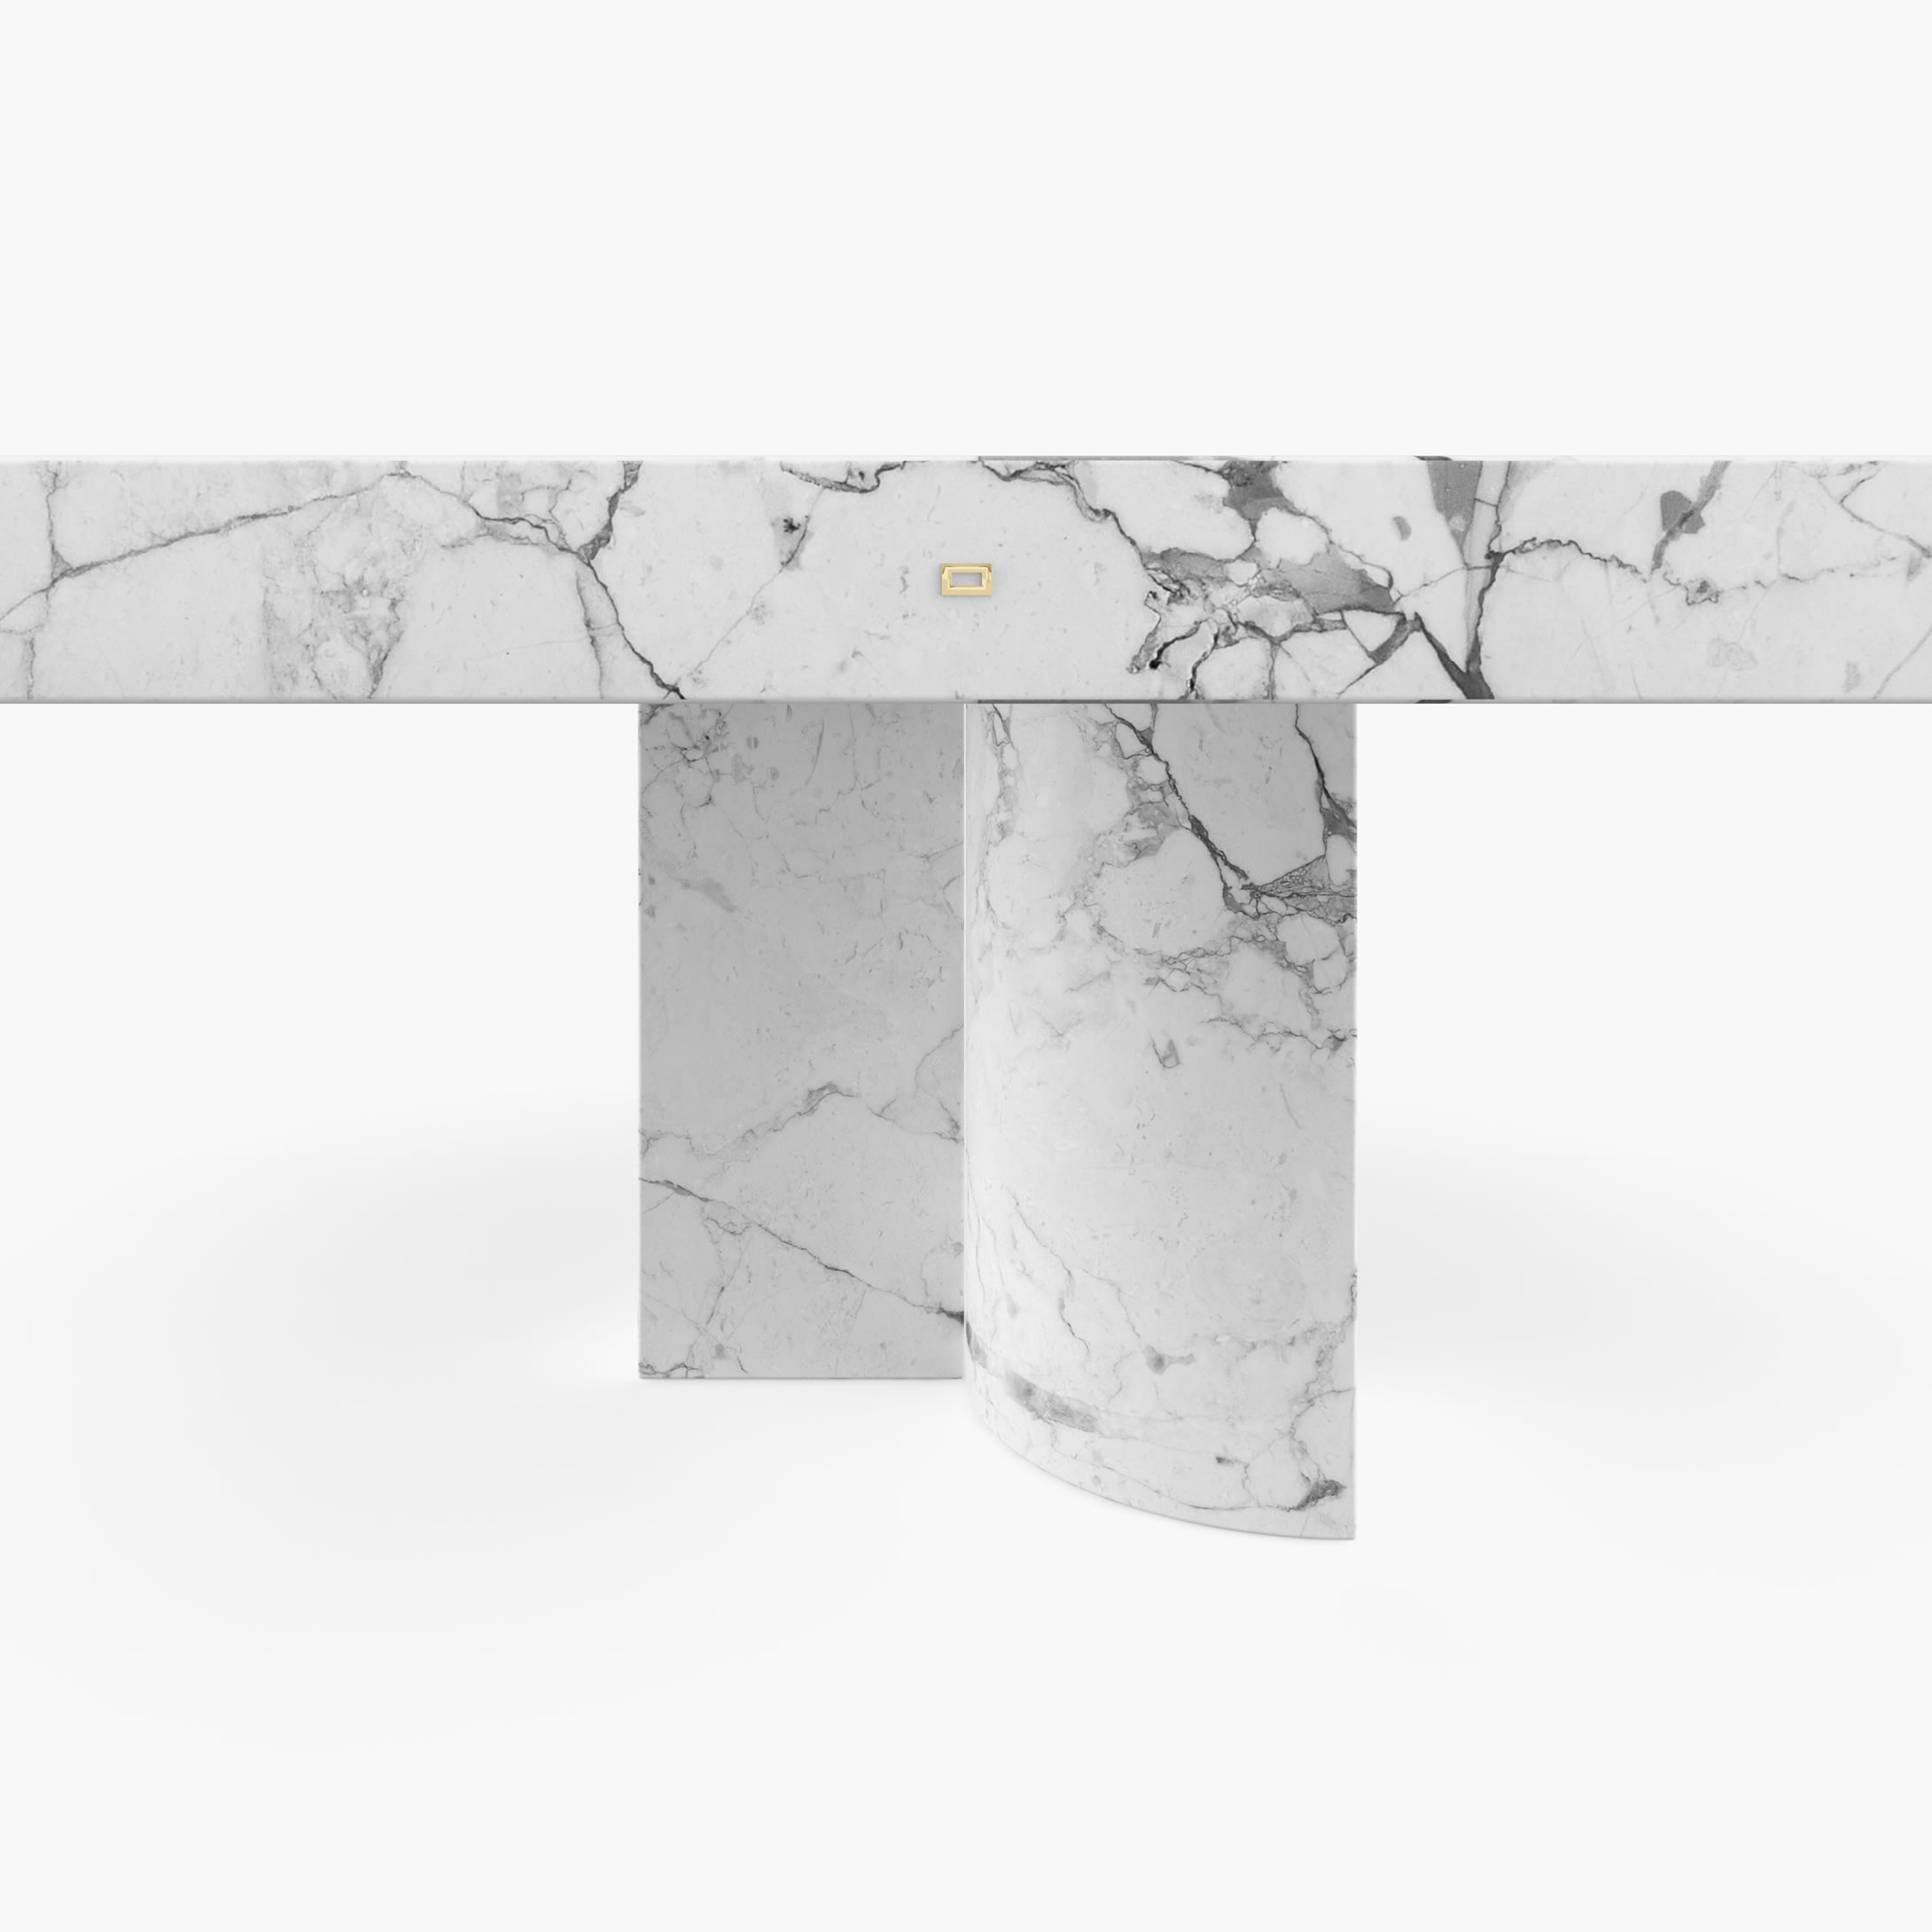 Dining Table quarter cylinder segments legs White Arabescato Marble unfathomable simplicity Dining Room minimalism Dining Tables FS 194 F FELIX SCHWAKE